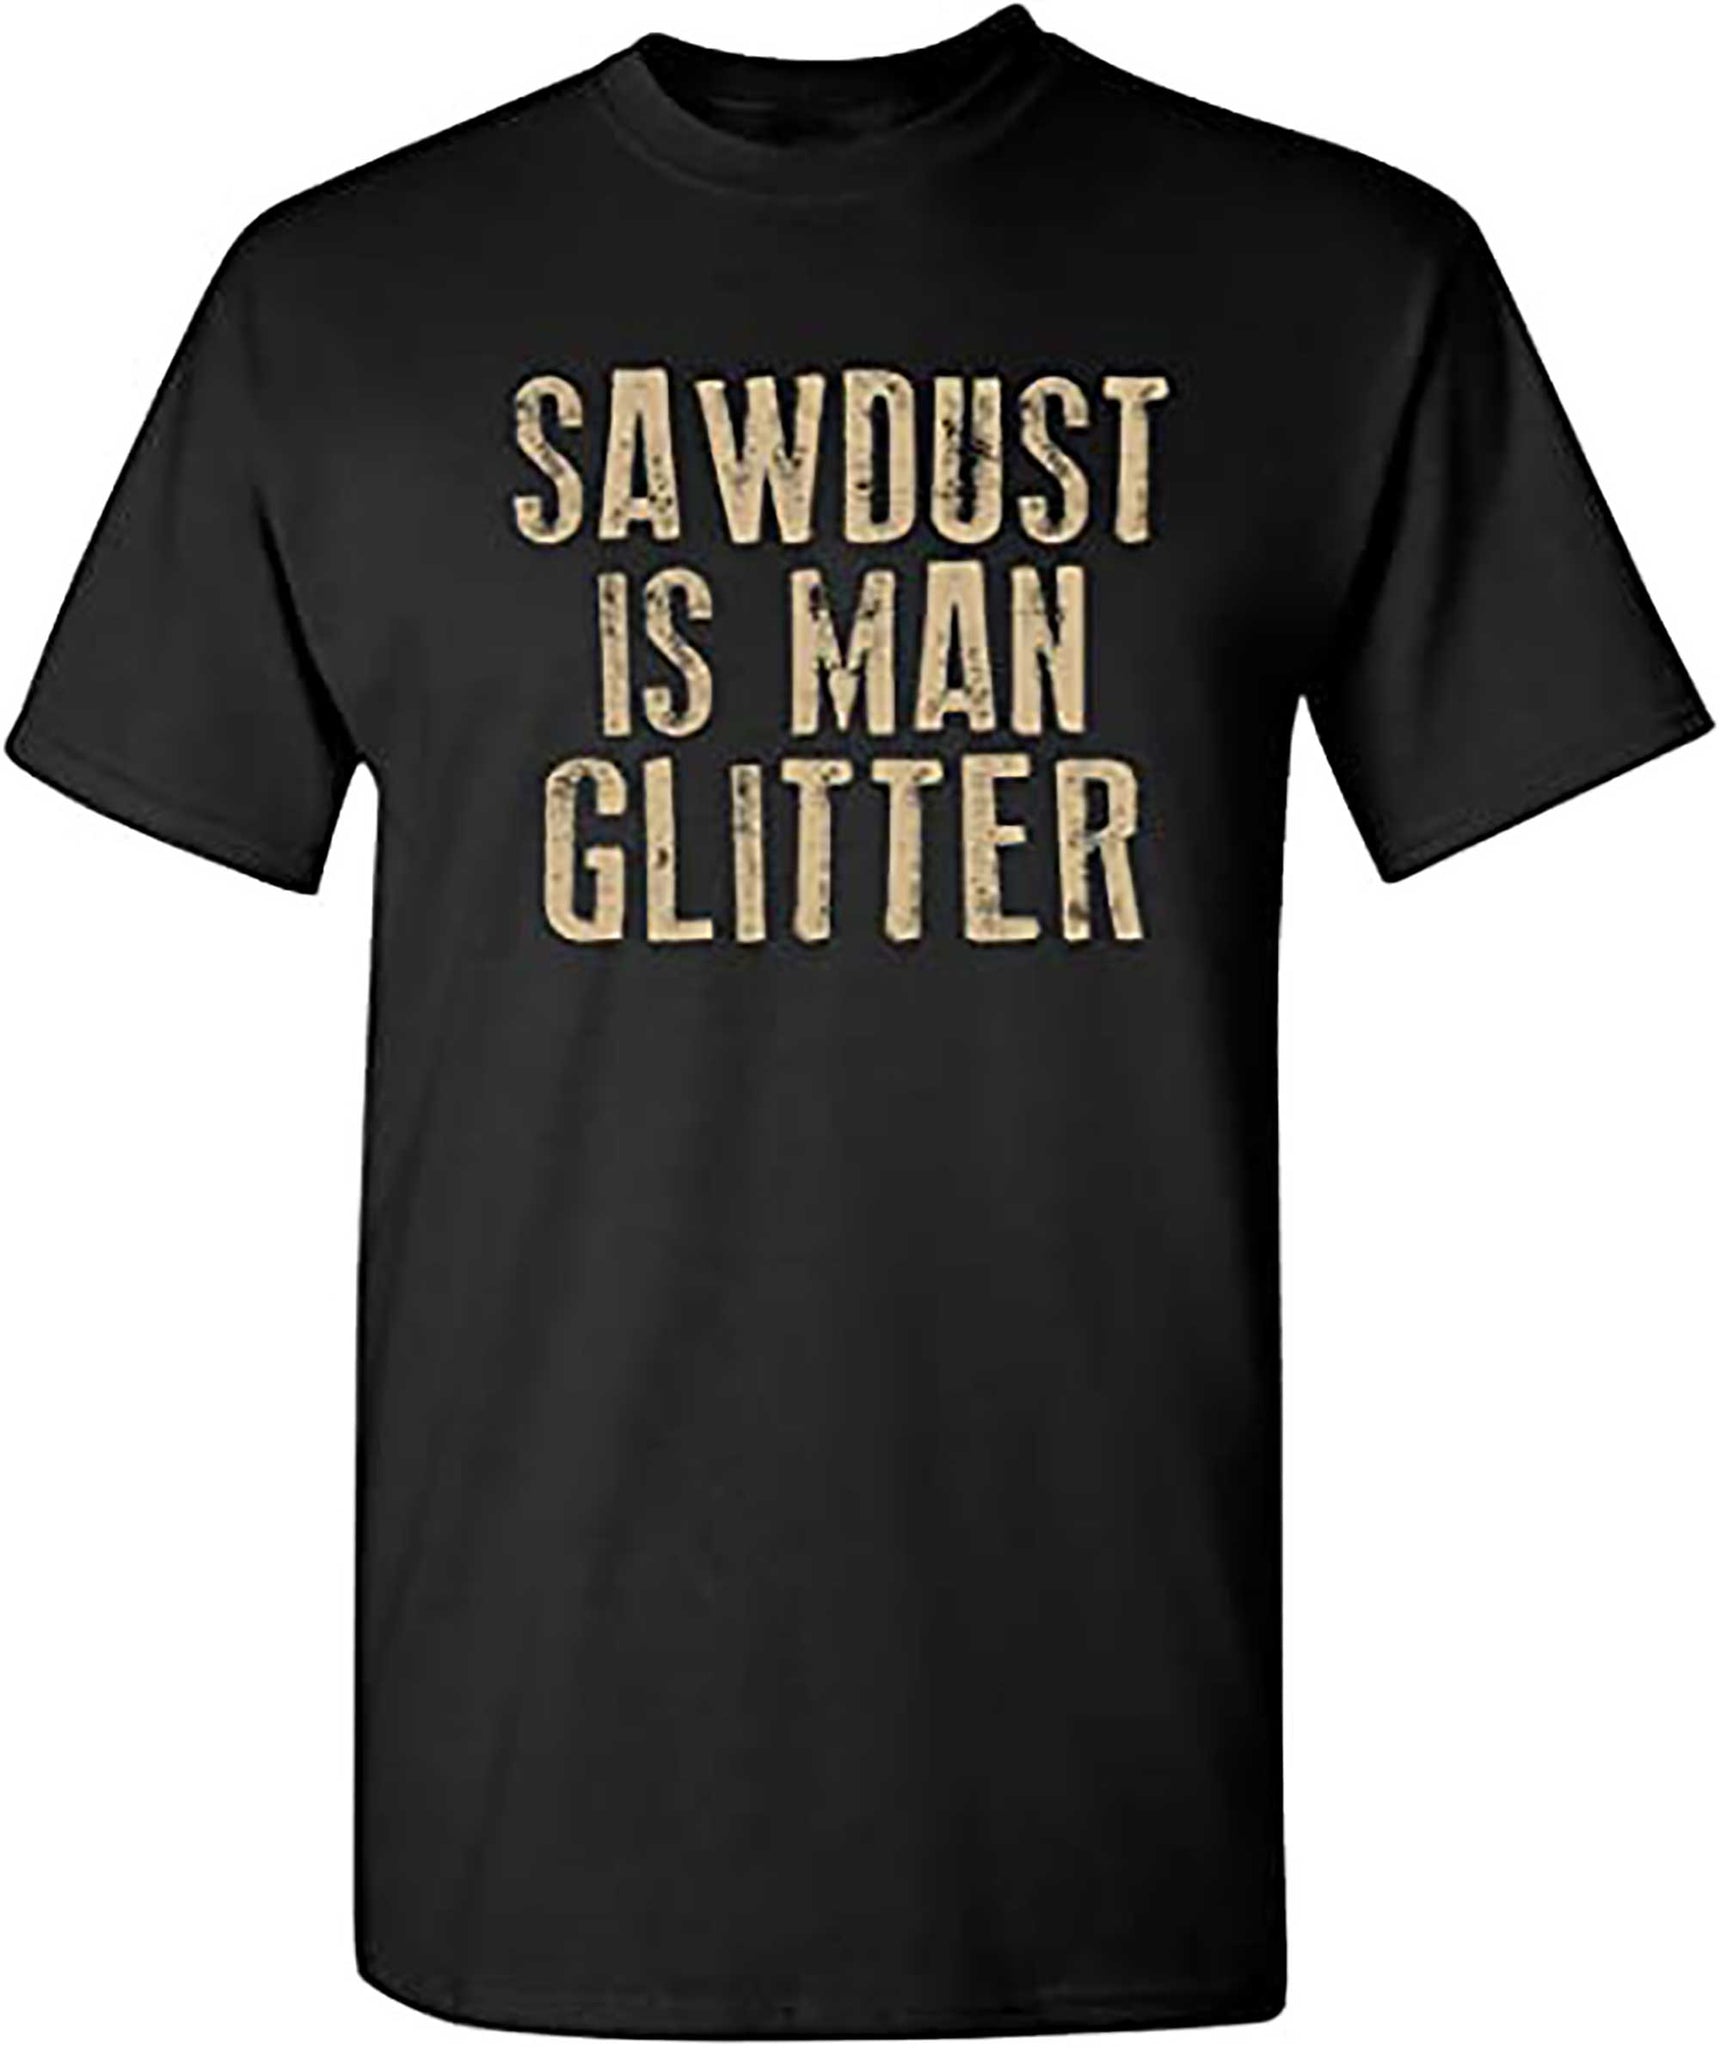 Sawdust is Man Glitter Graphic Novelty Sarcastic Funny T Shirt